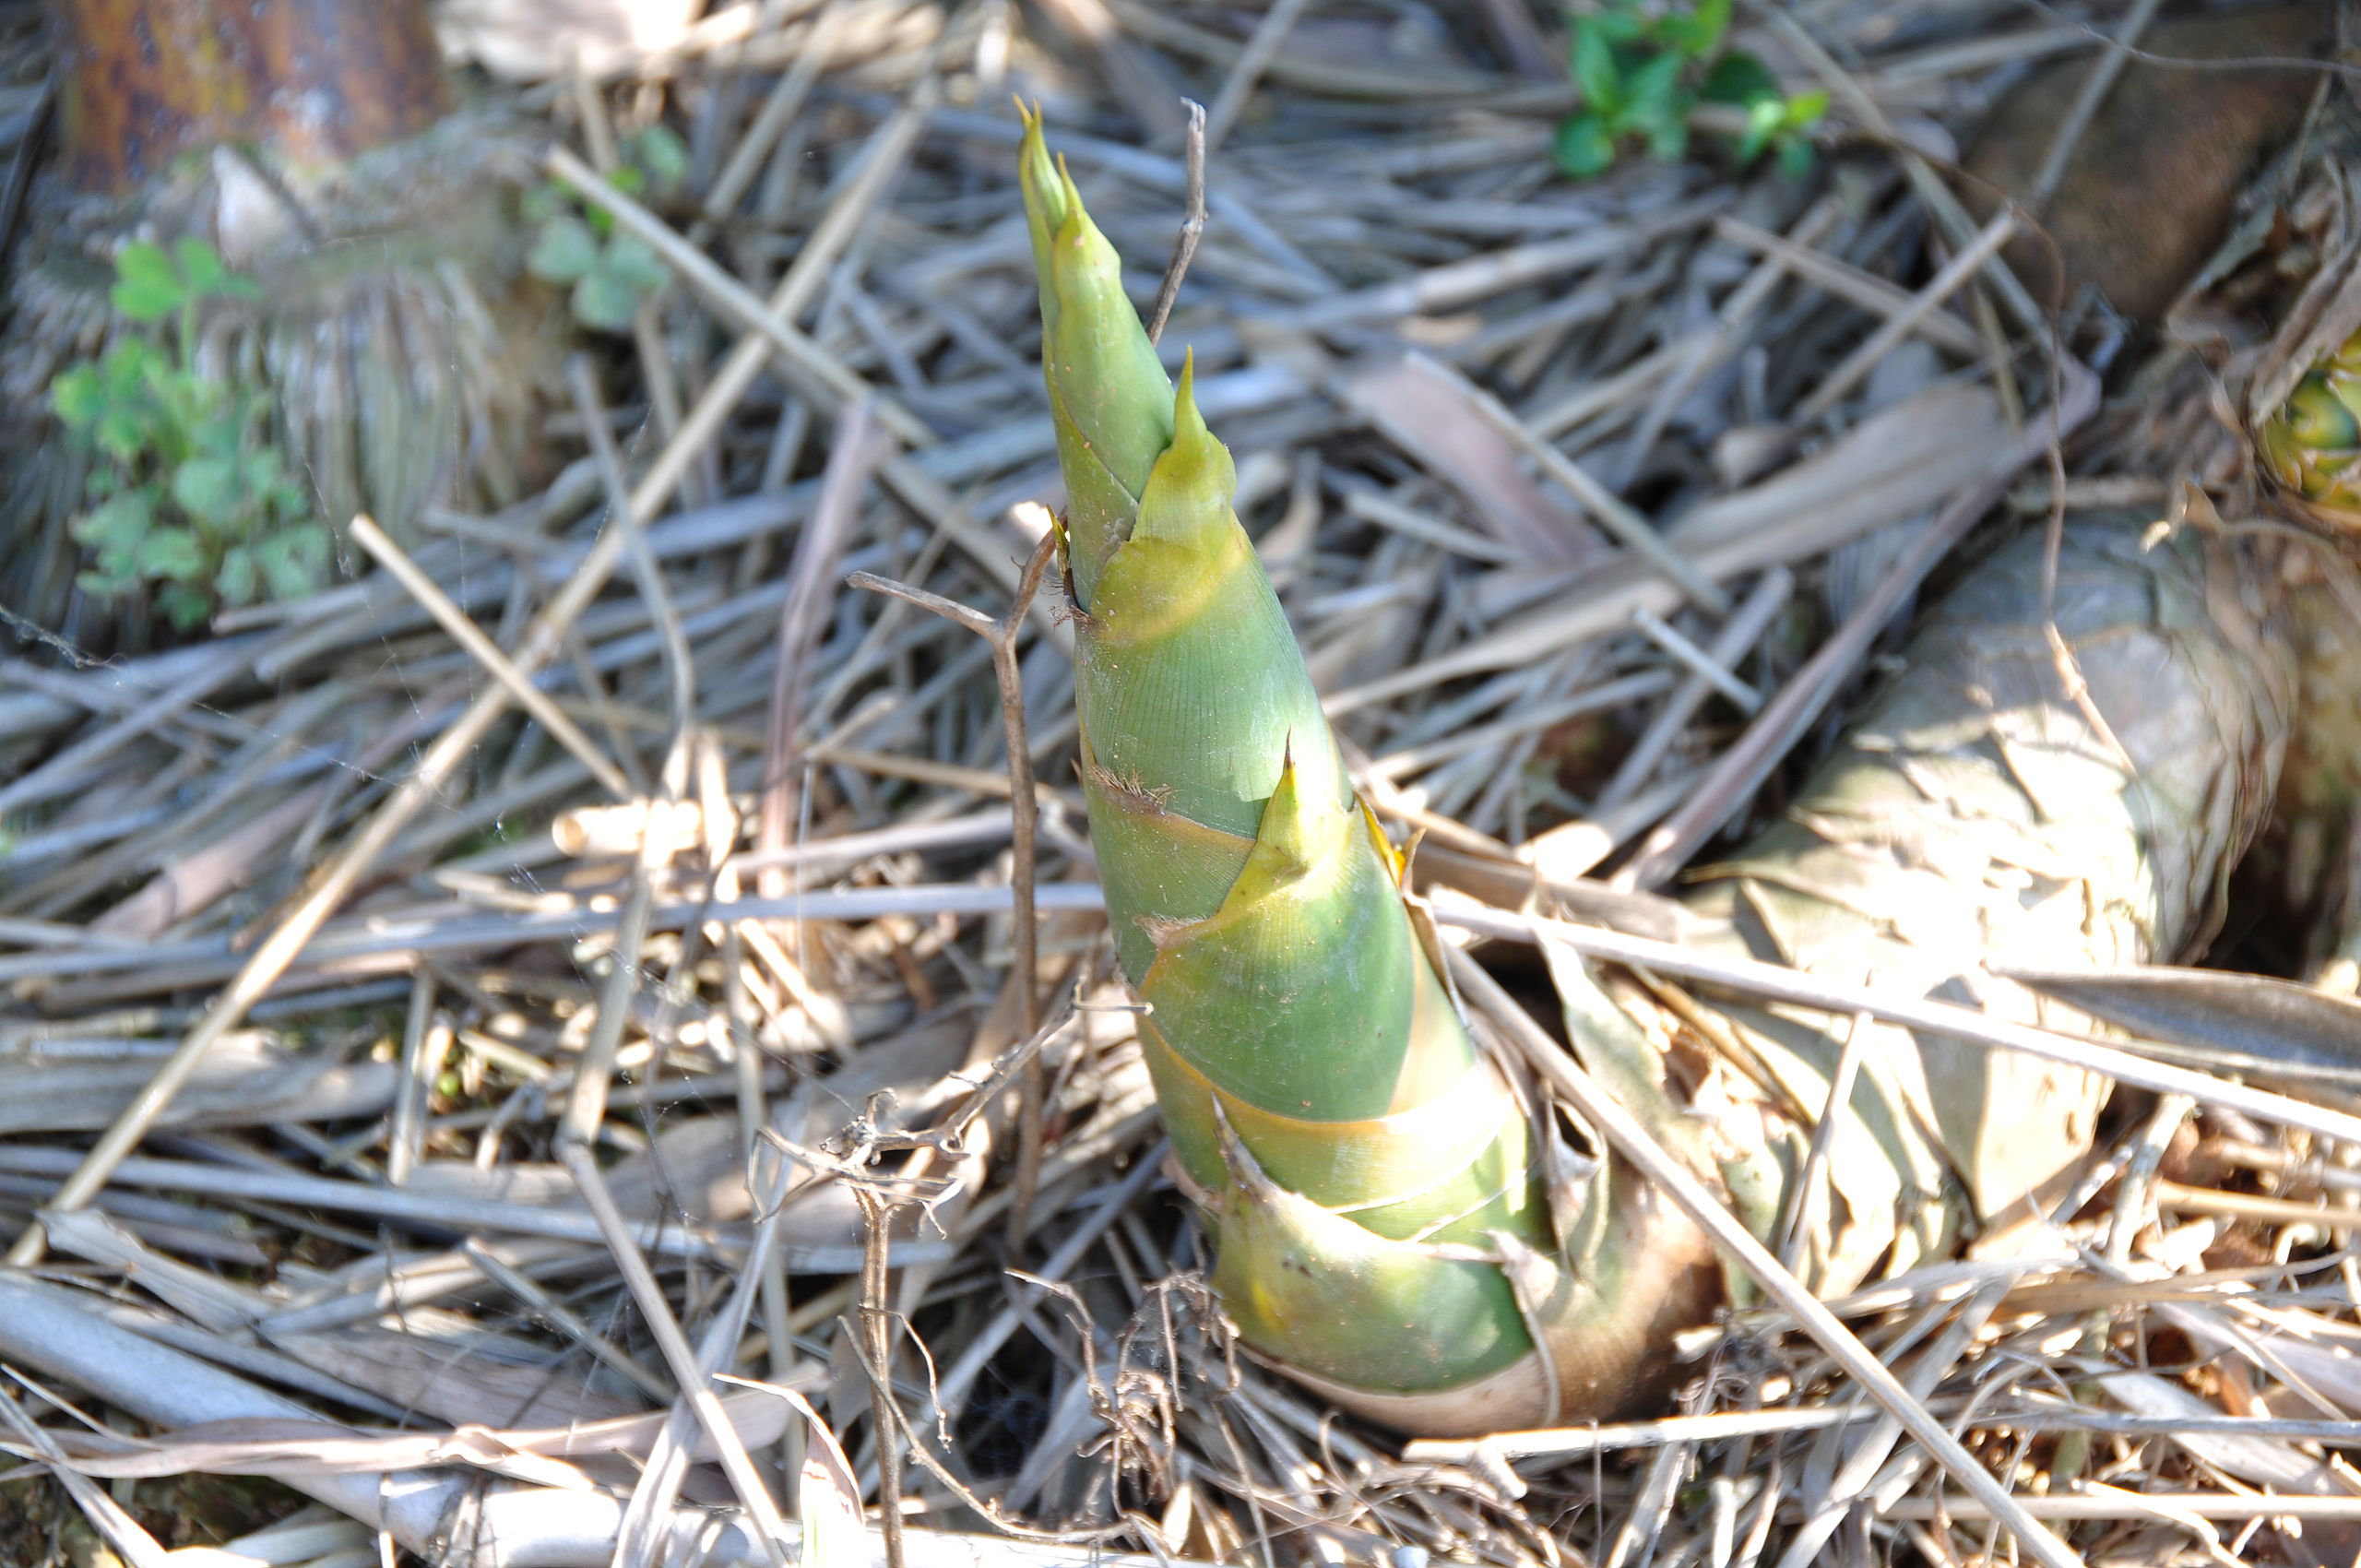 File:Thorny Bamboo.jpg Commons